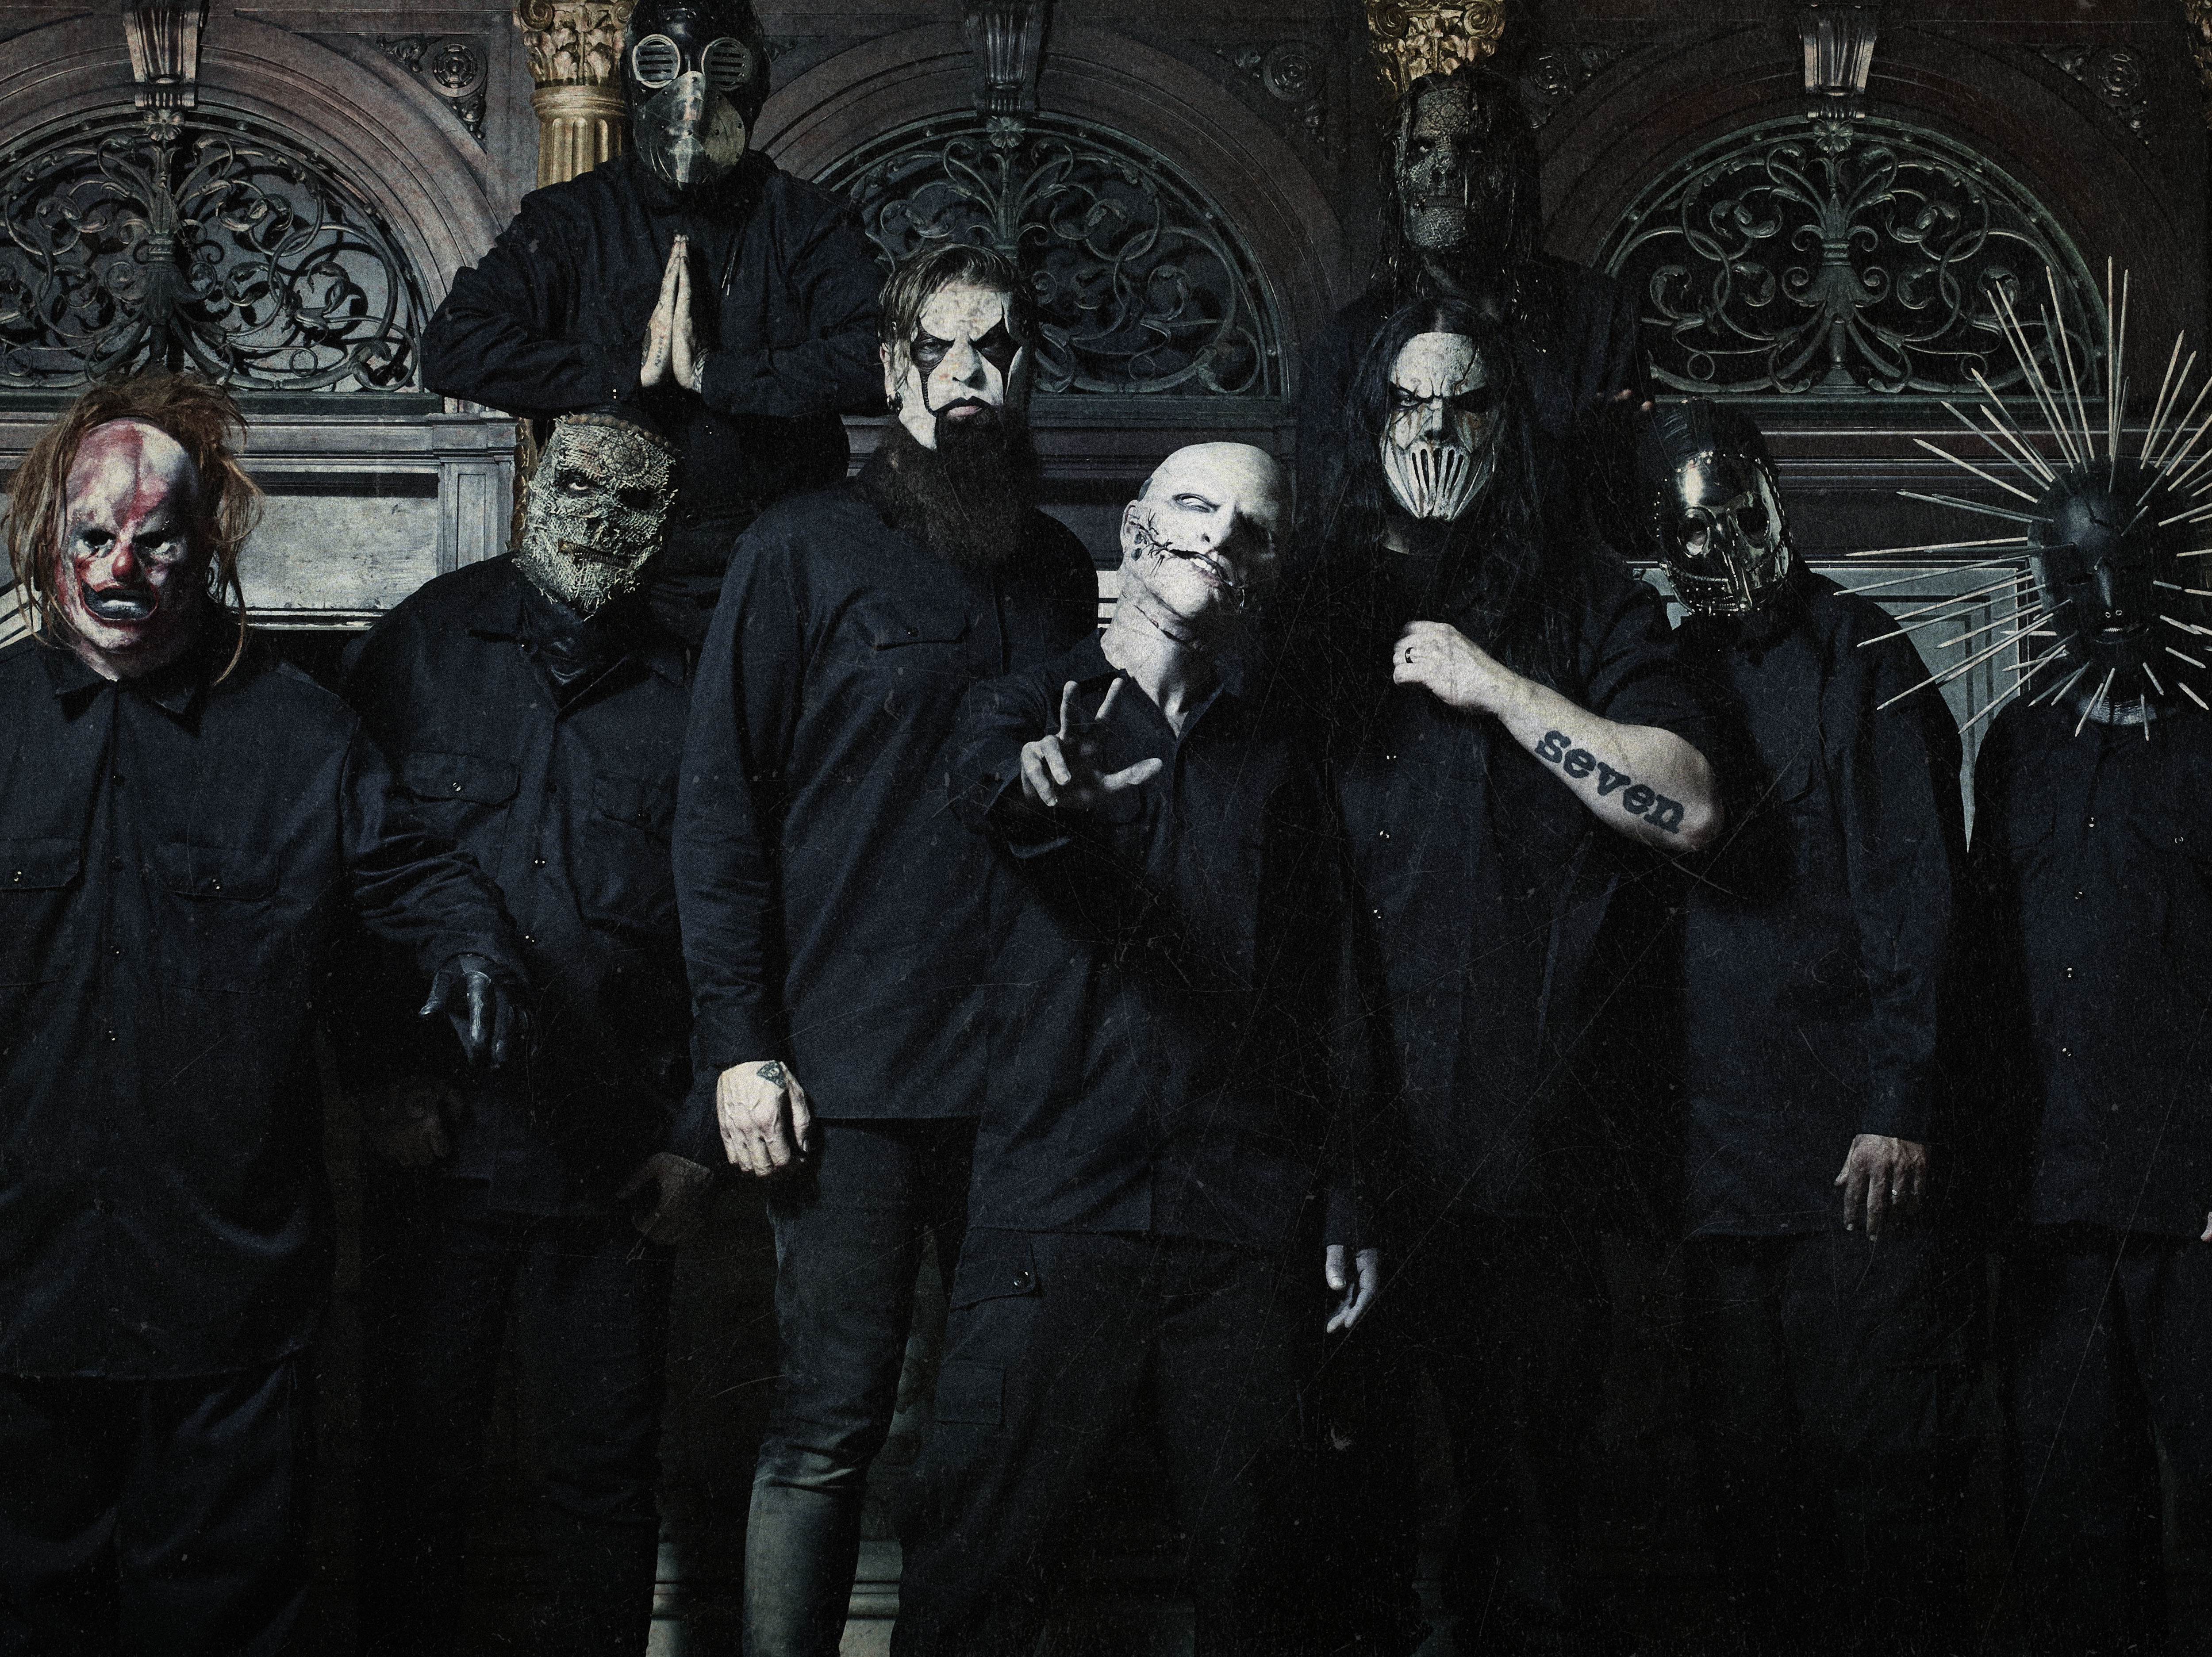 Slipknot Wallpapers Images Photos Pictures Backgrounds